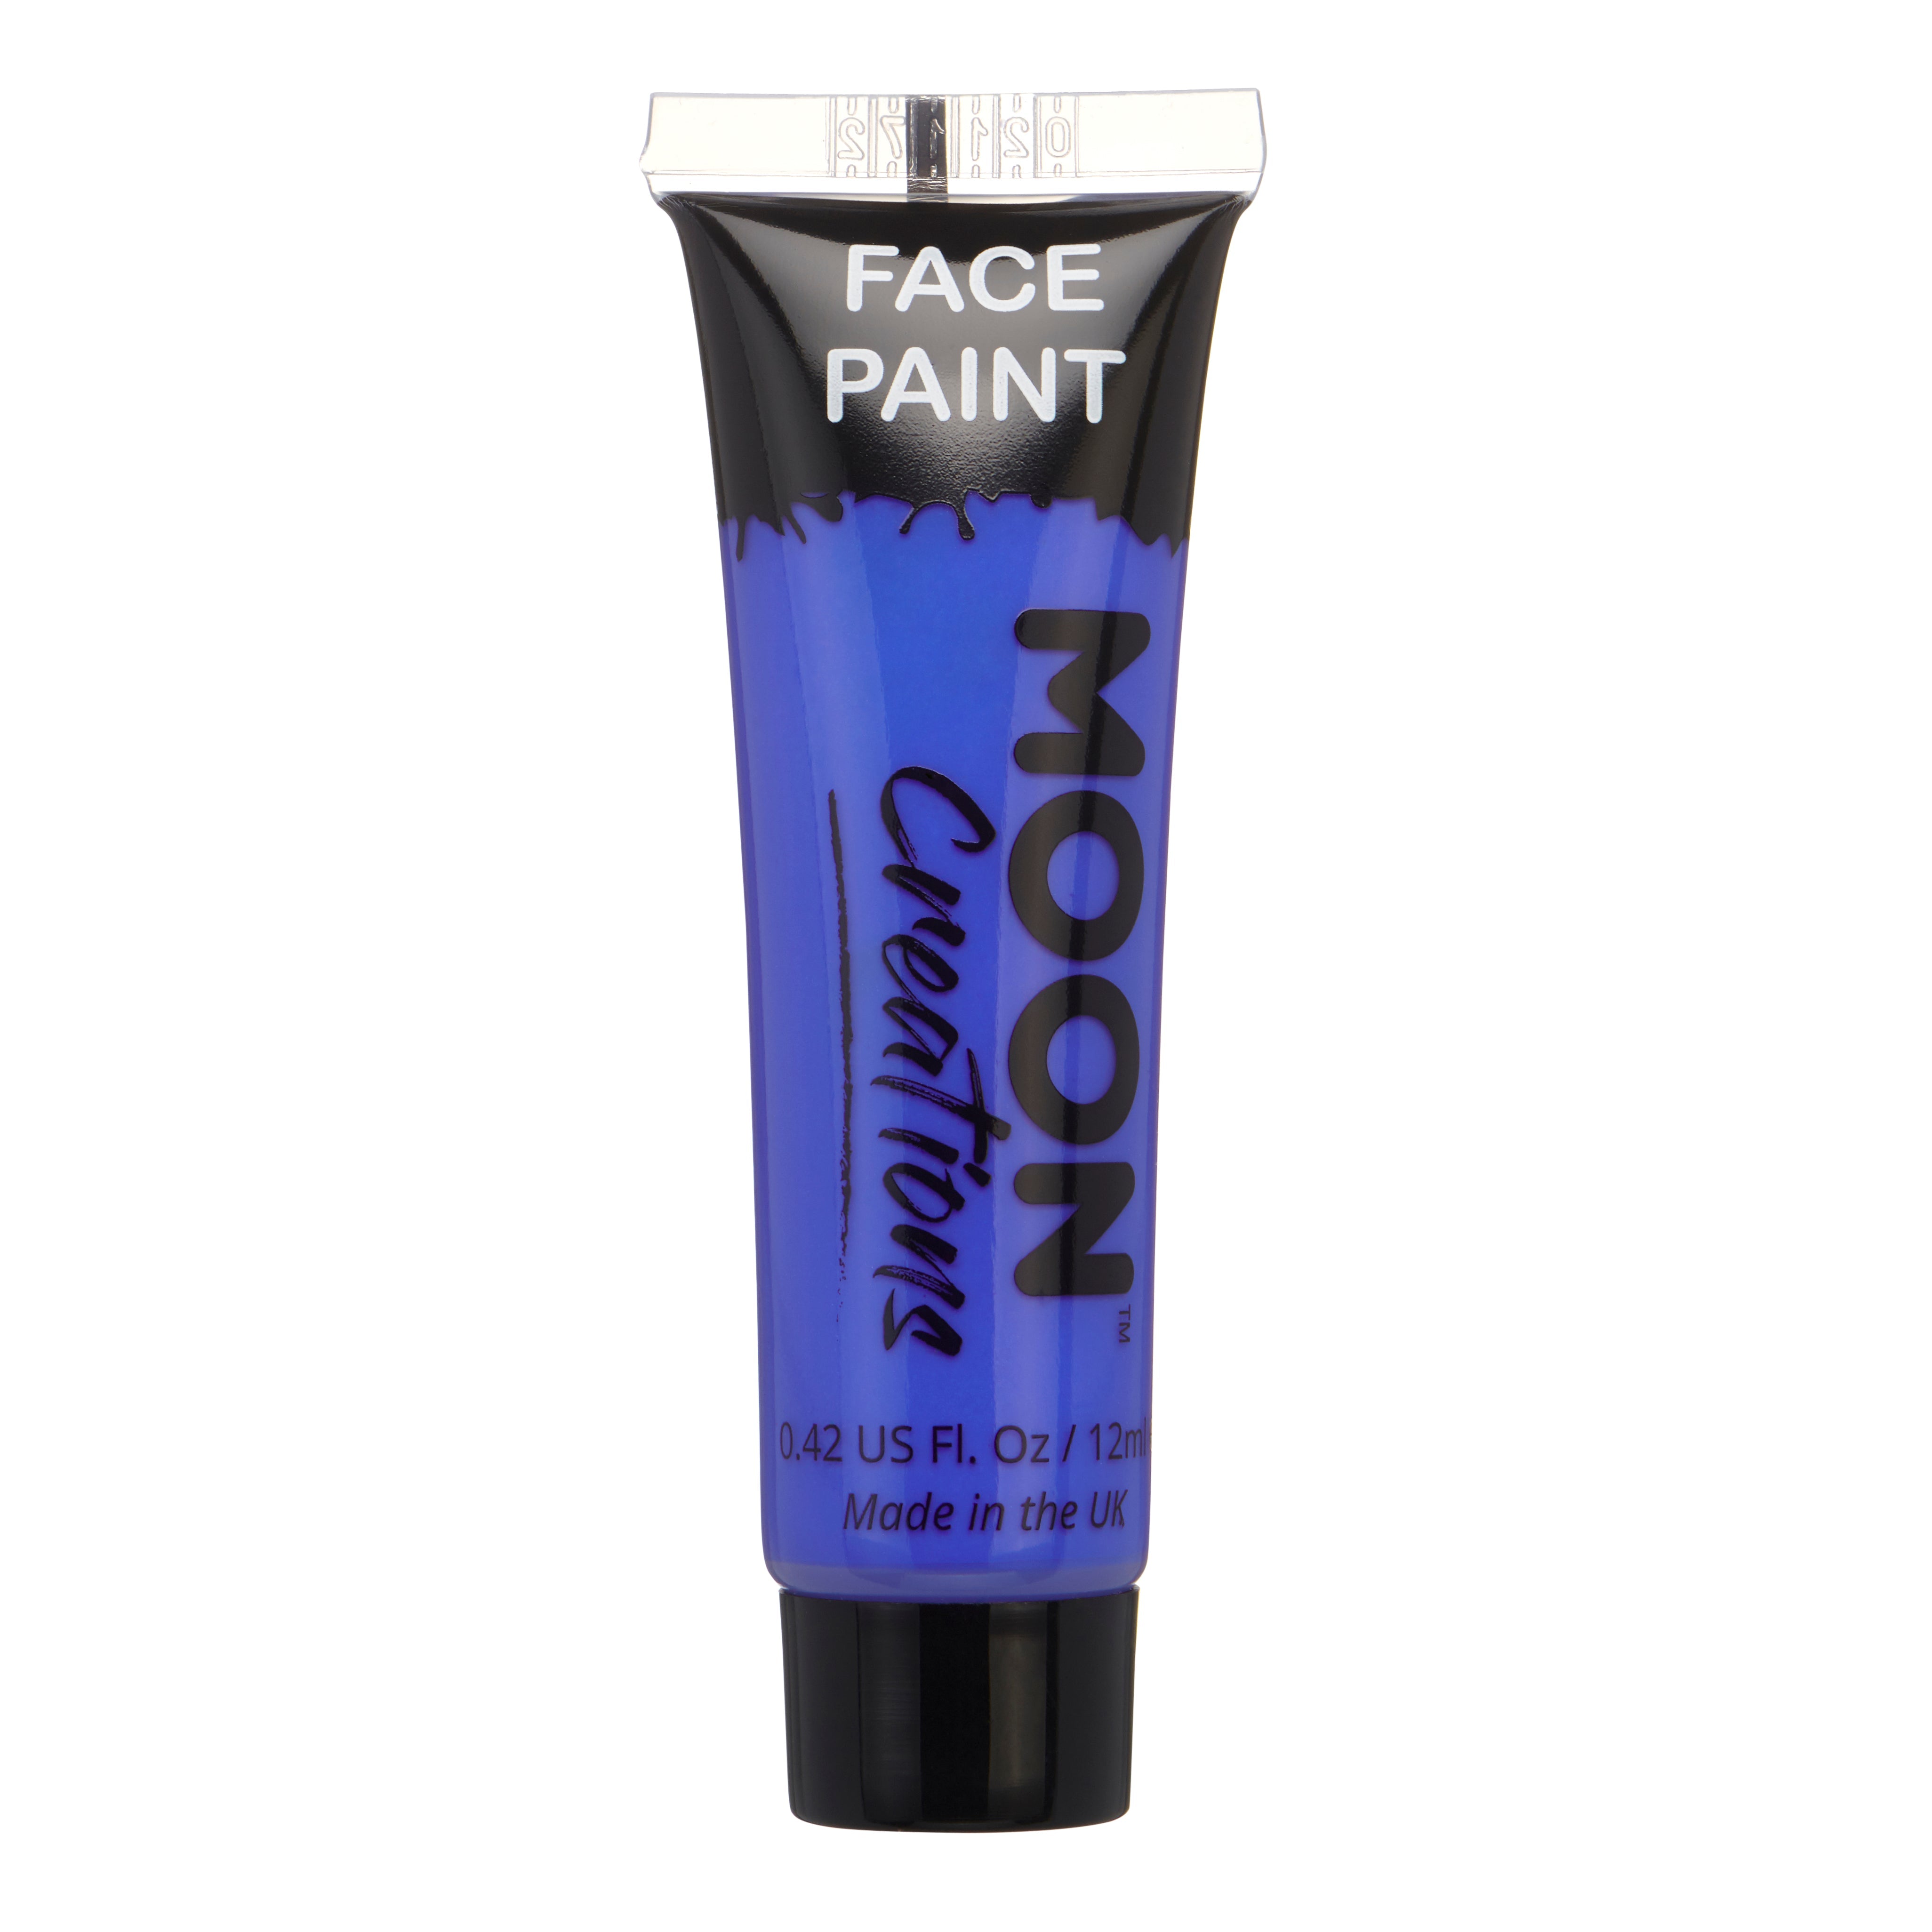 Dark Blue - Face & Body Paint Makeup, 12mL. Cosmetically certified, FDA & Health Canada compliant, cruelty free and vegan.